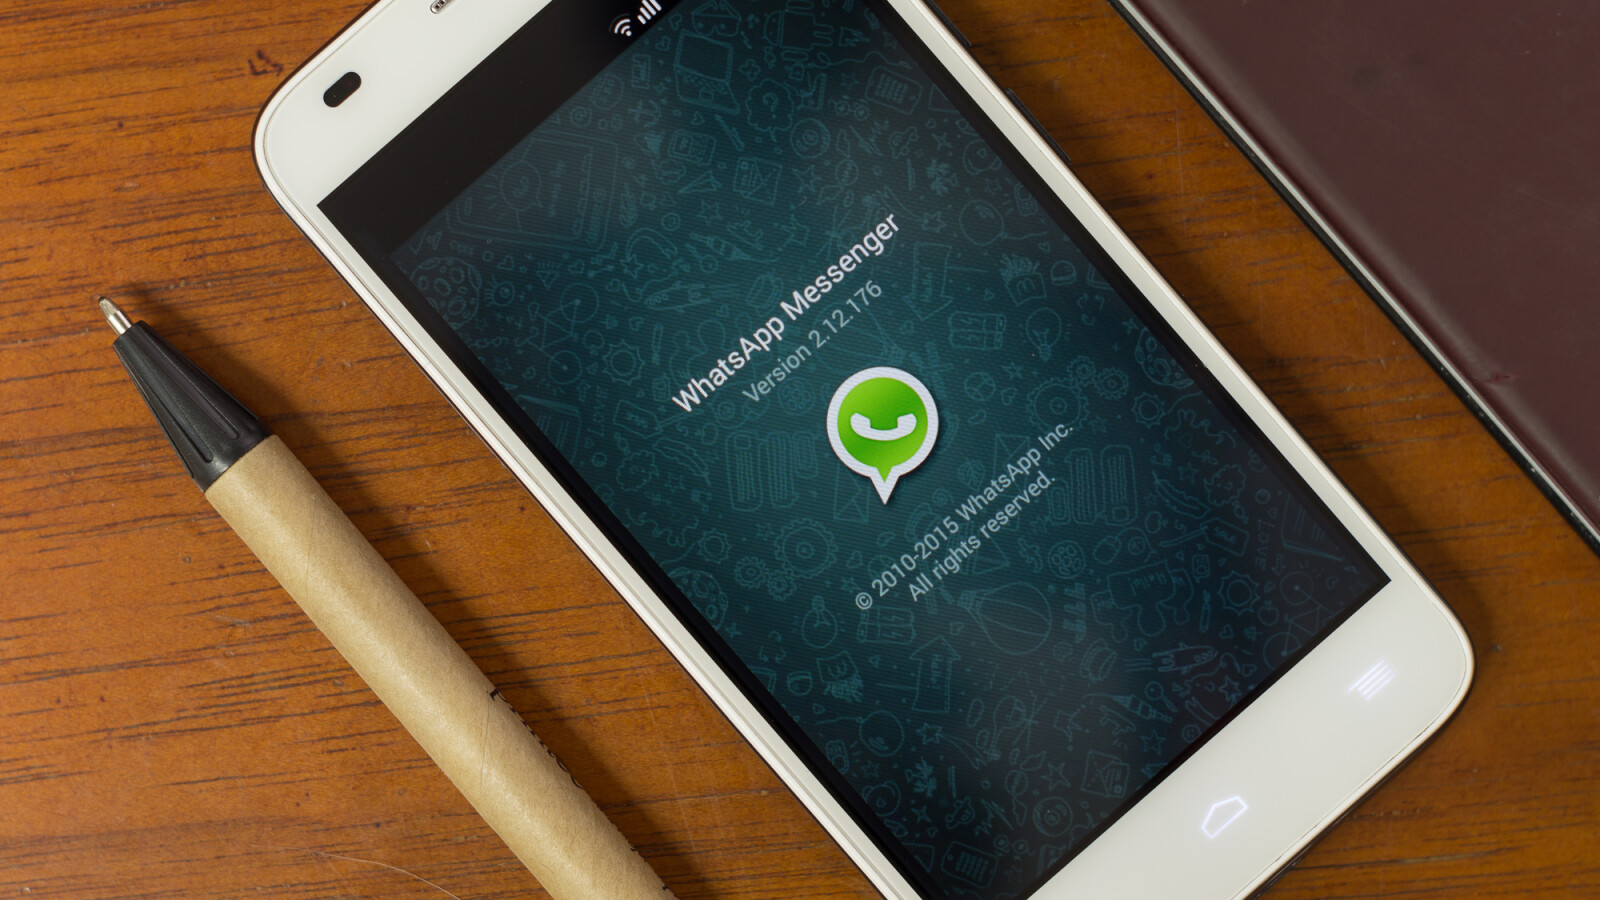 WhatsApp: the new functionality is finally available – delivered personally by Mark Zuckerberg